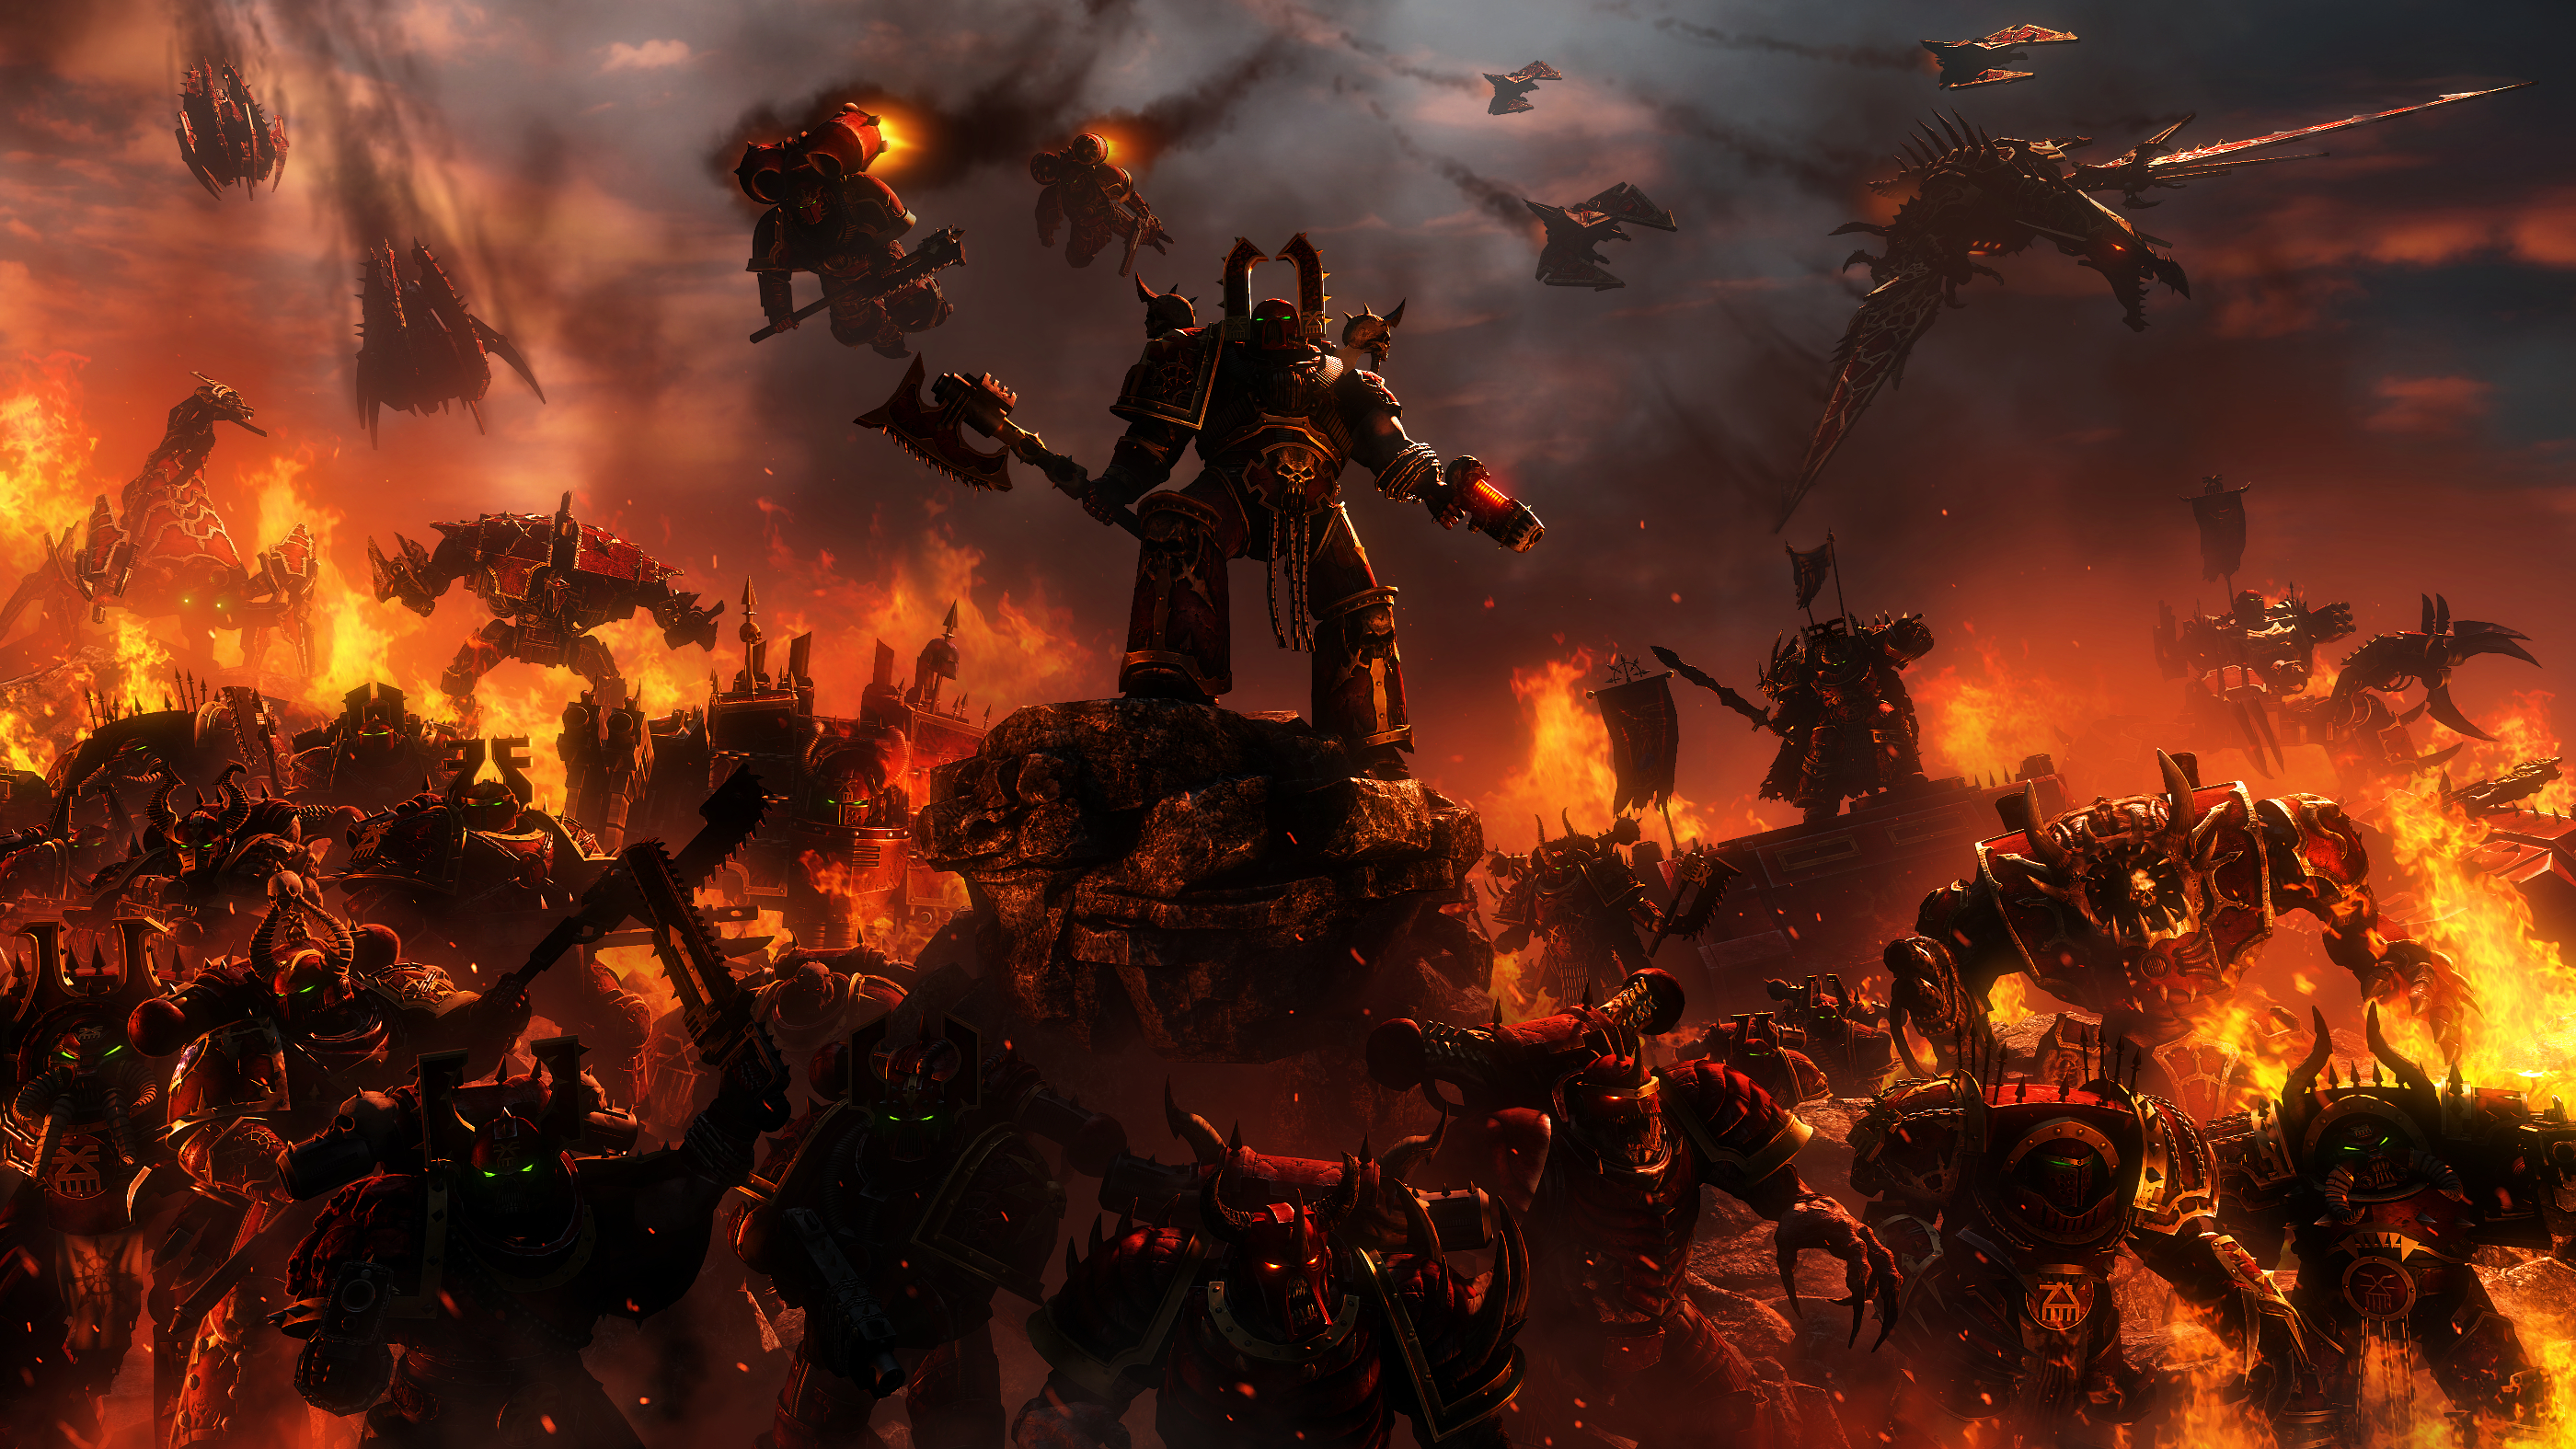 Blood and Fire image - Warhammer 40K Fan Group.